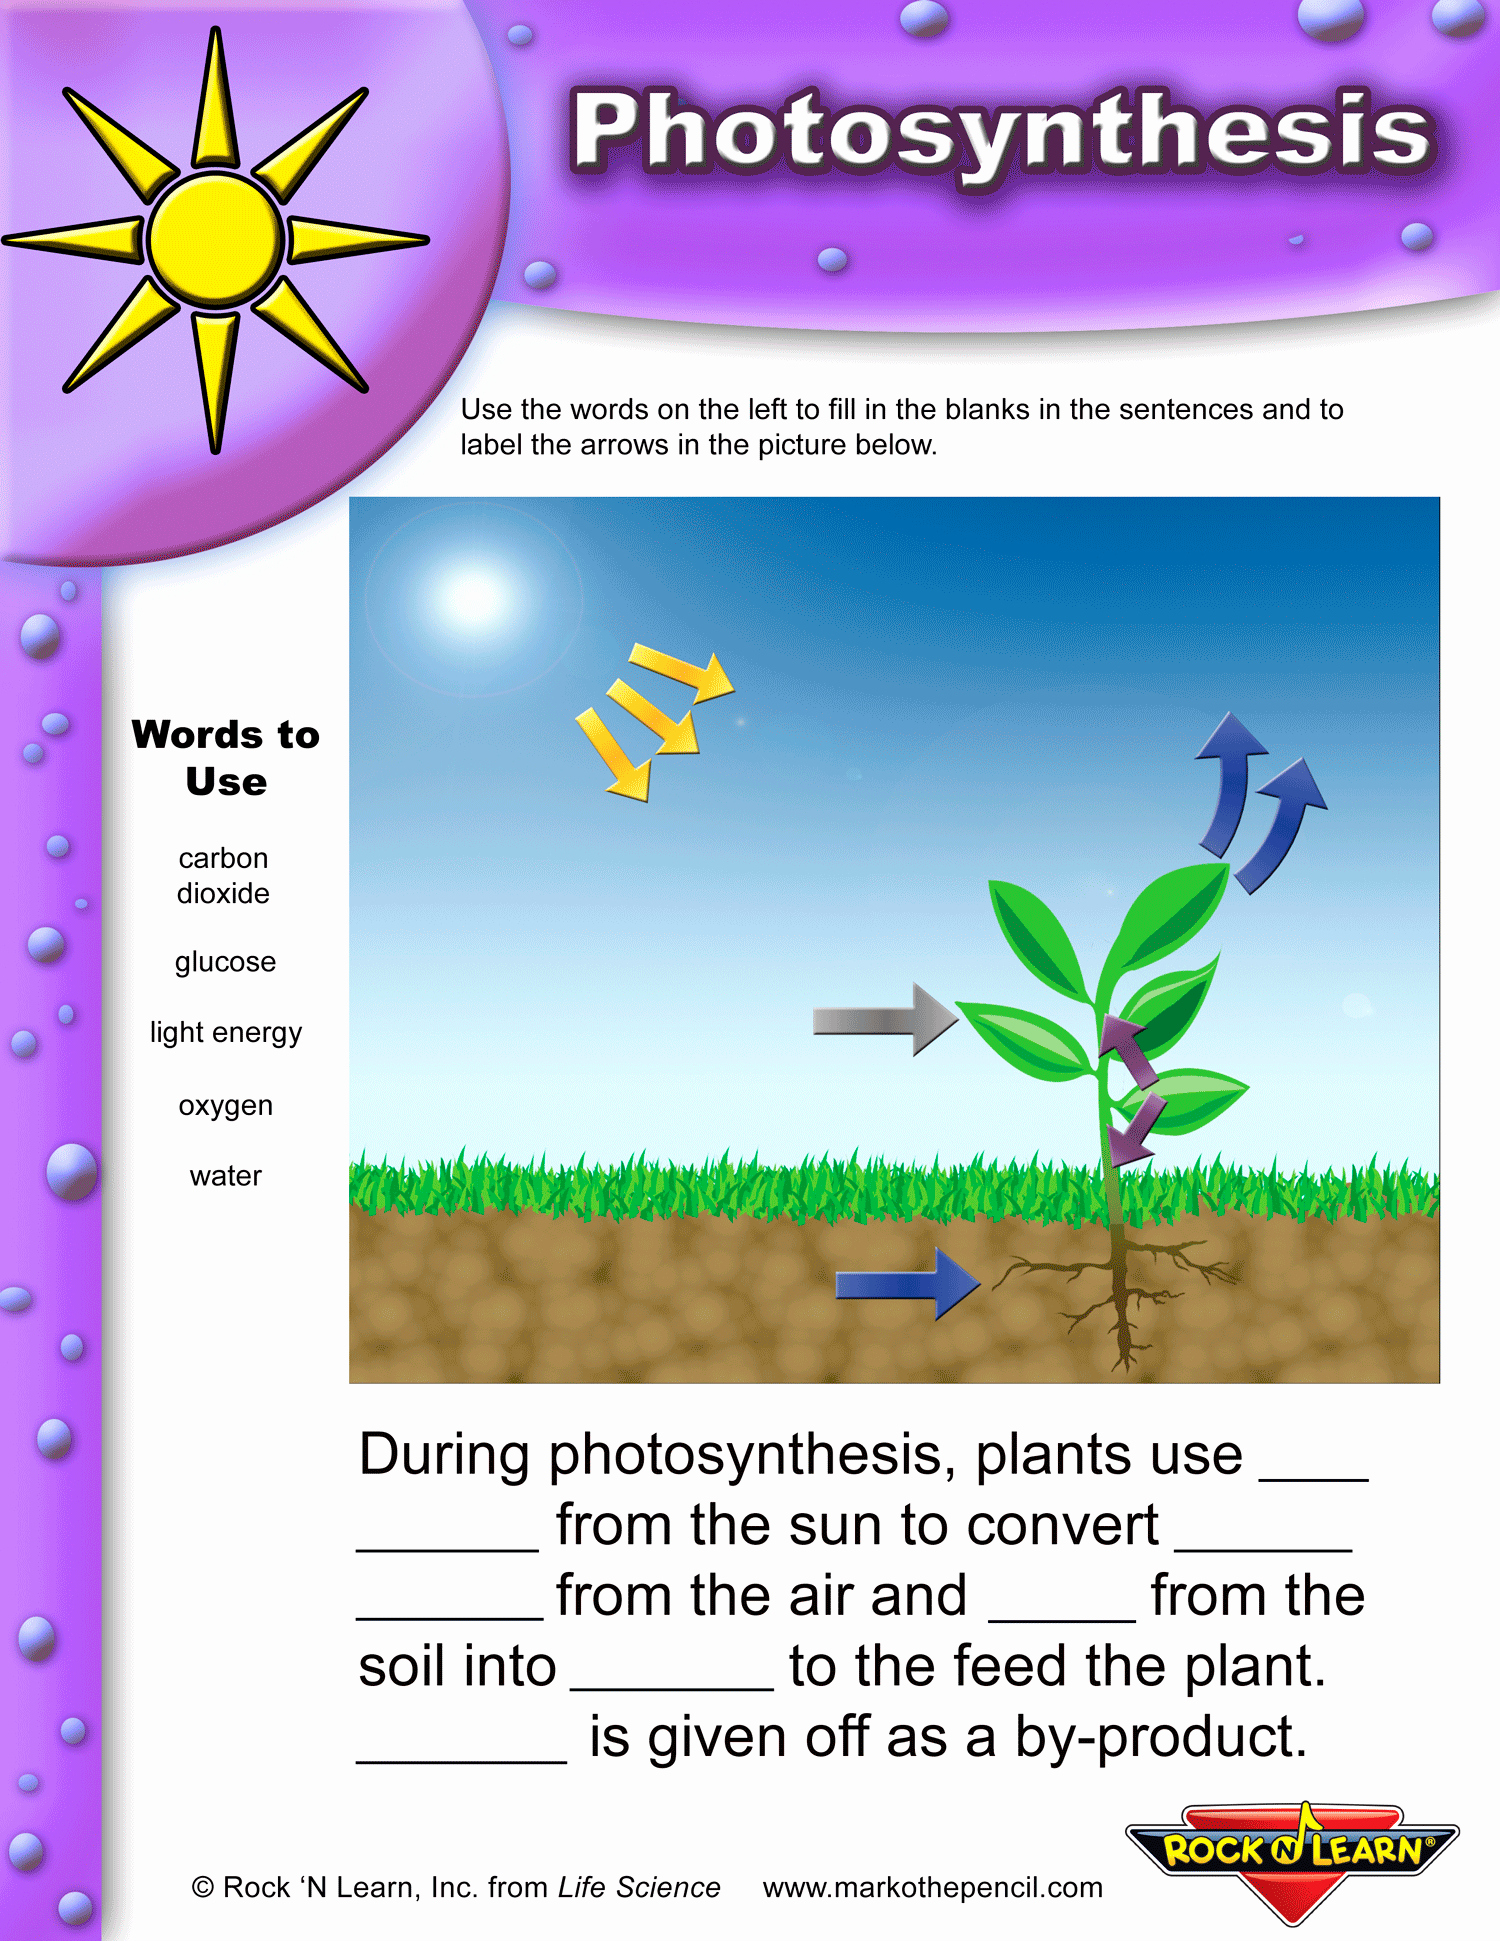 Photosynthesis Worksheet High School Awesome Synthesis Worksheets for Elementary Classrooms